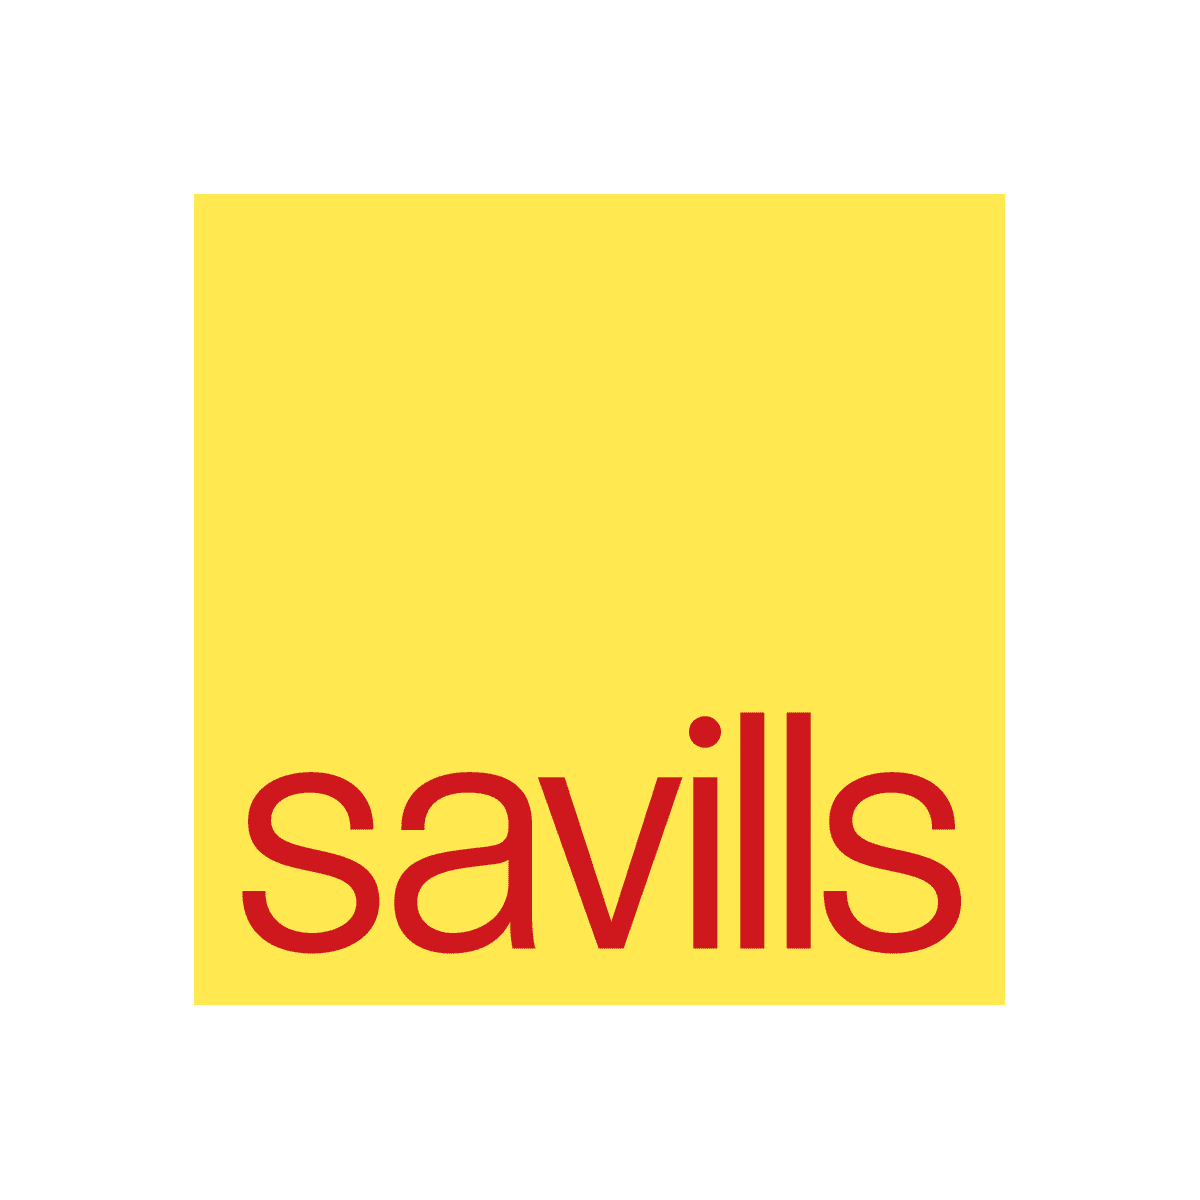 Logo of yellow box with red text on the bottom reading 'Savills'